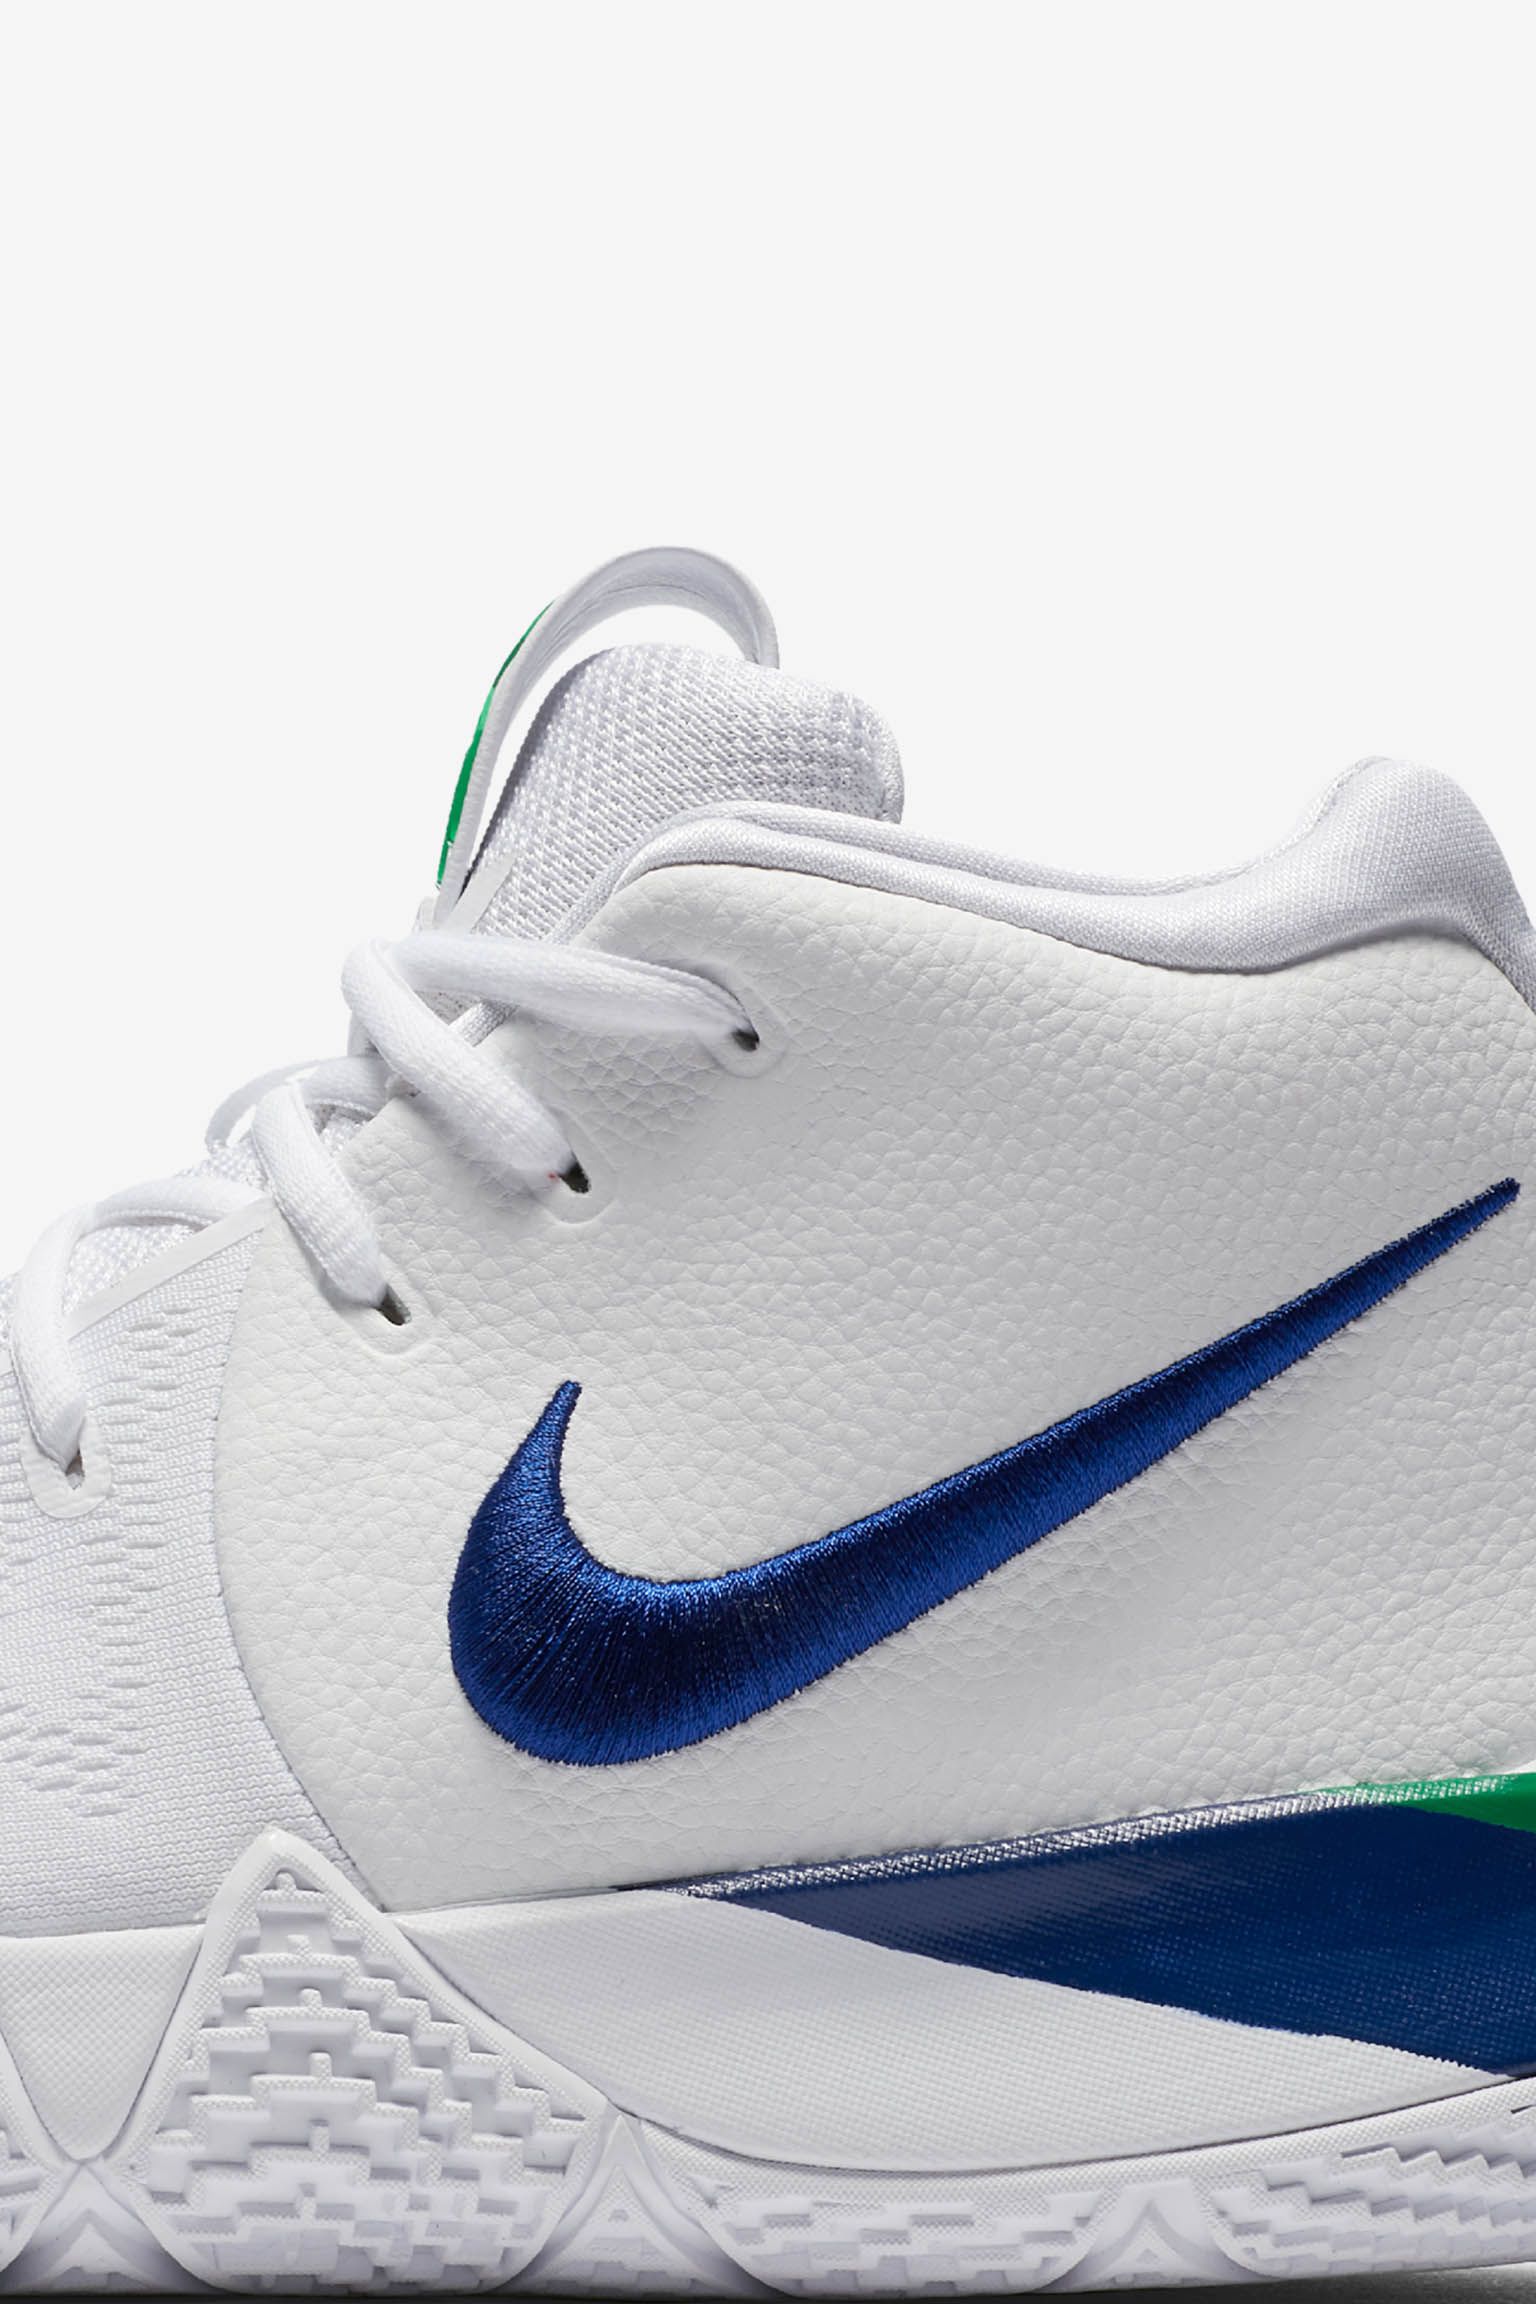 Nike Kyrie 4 'White & Deep Royal Blue' Release Date. Nike SNKRS GB